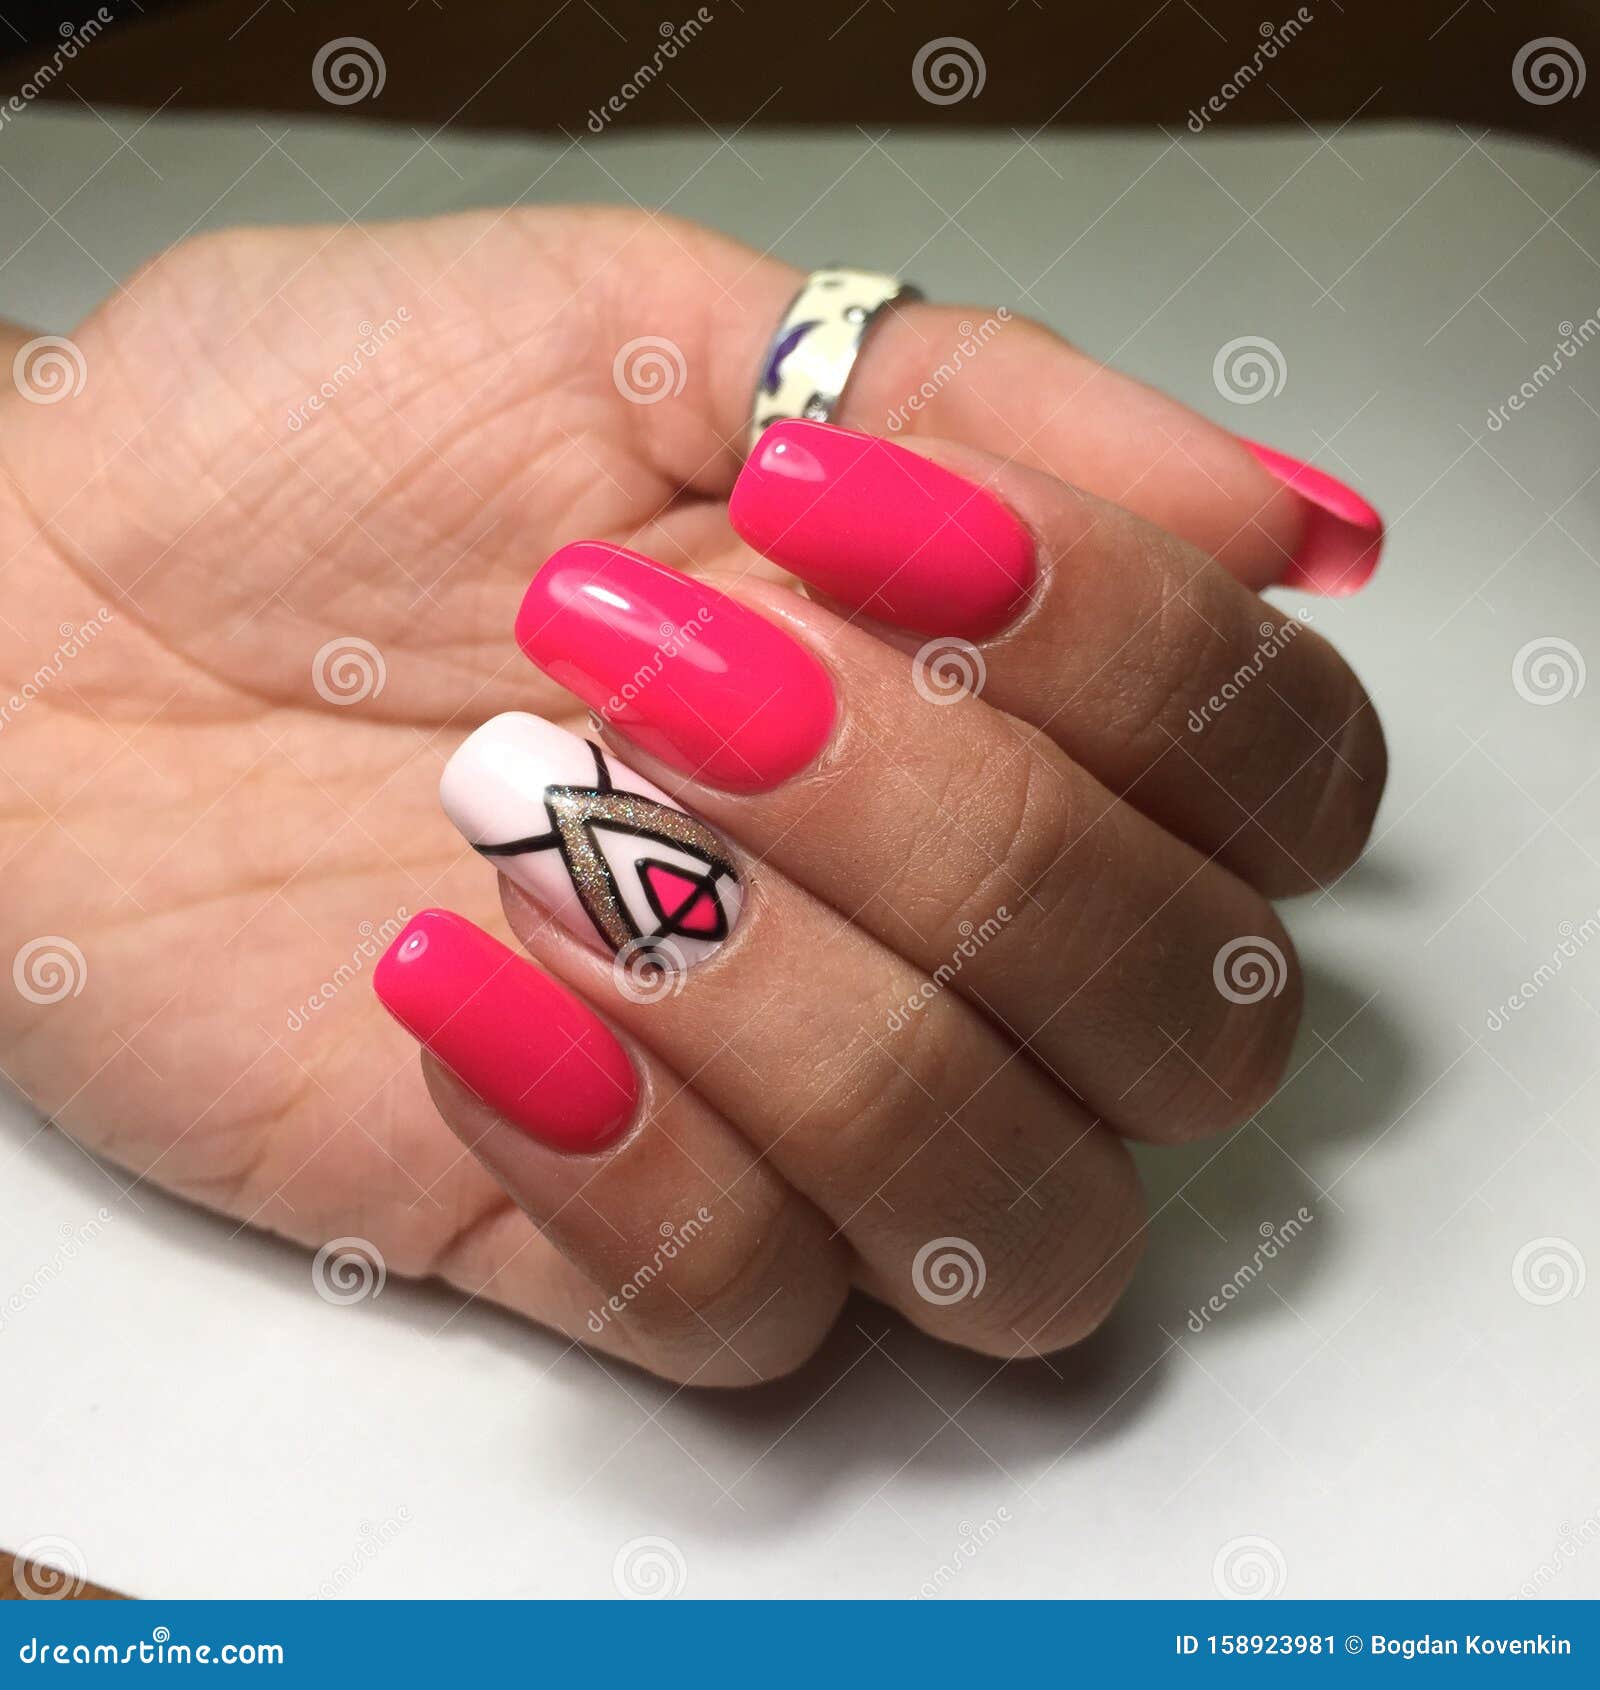 female hands with stylish red manicure on grey background